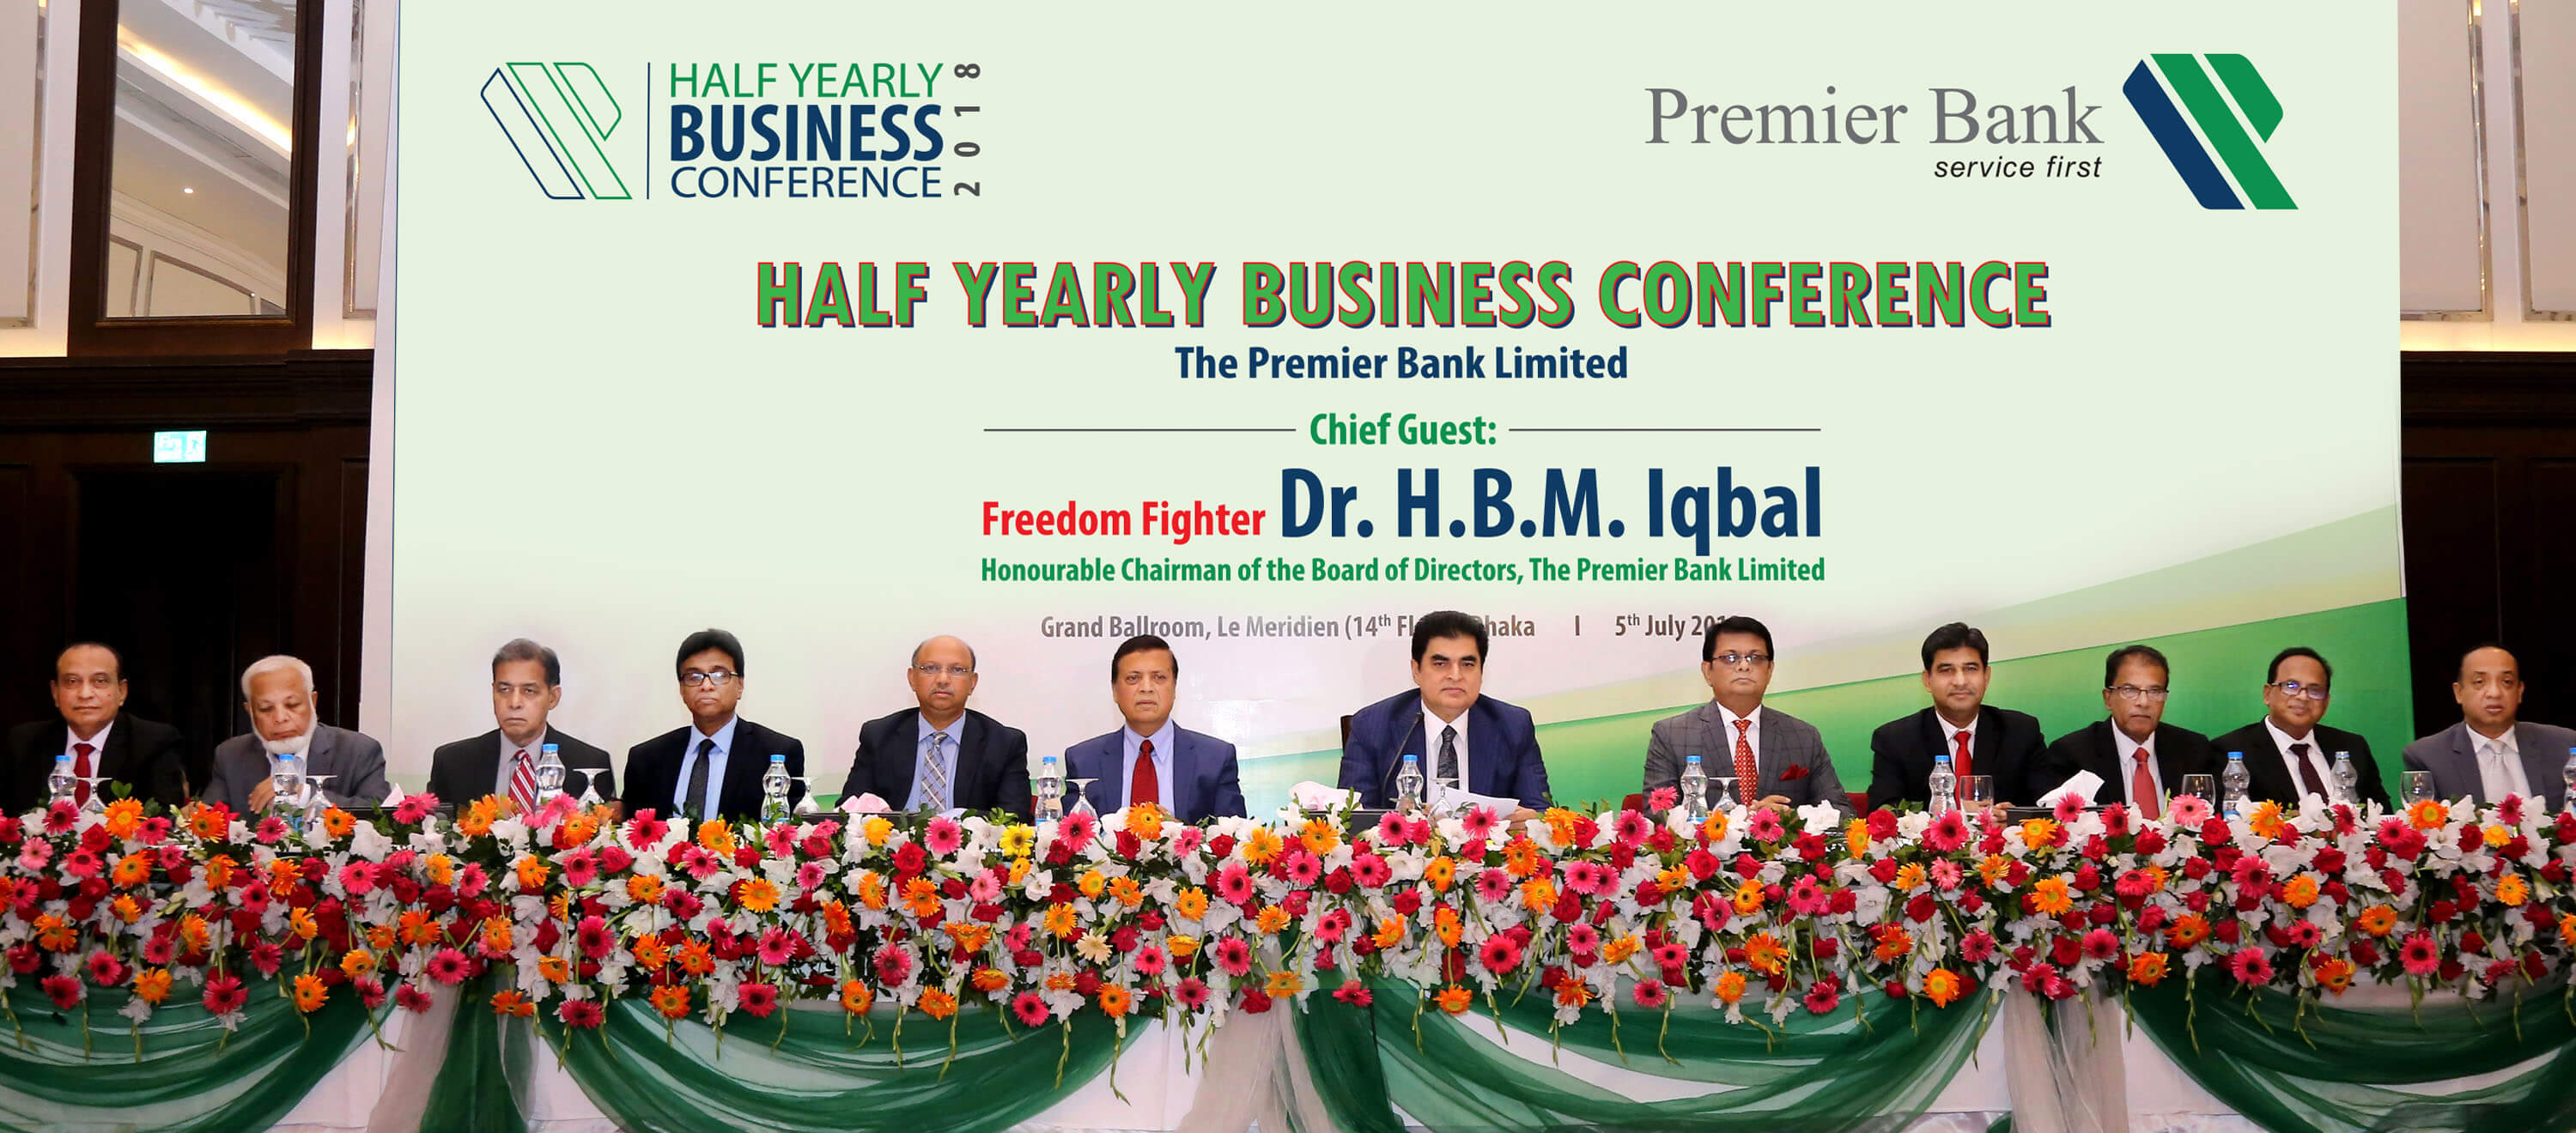 Premier Bank Half-Yearly Business Conference 2018